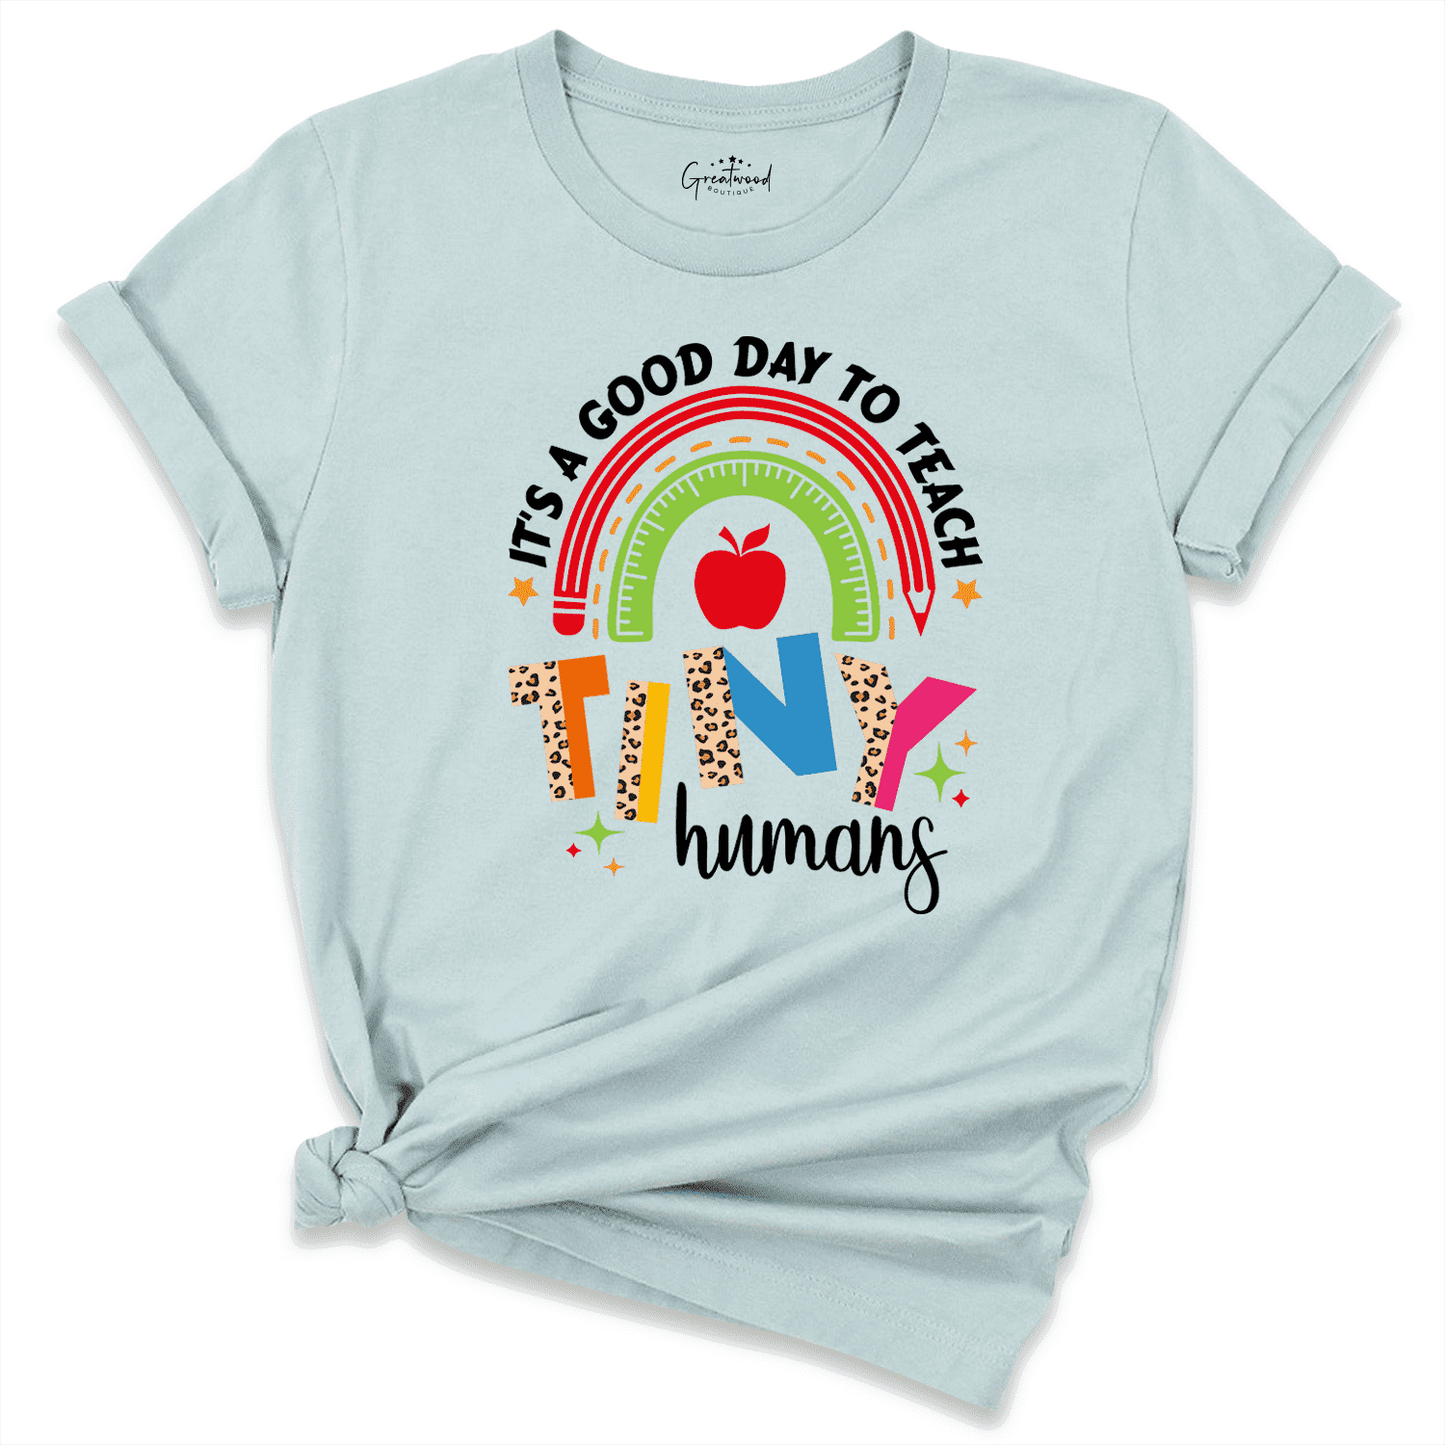 It's A Good Day To Teach Tiny Humans Shirt Blue - Greatwood Boutique